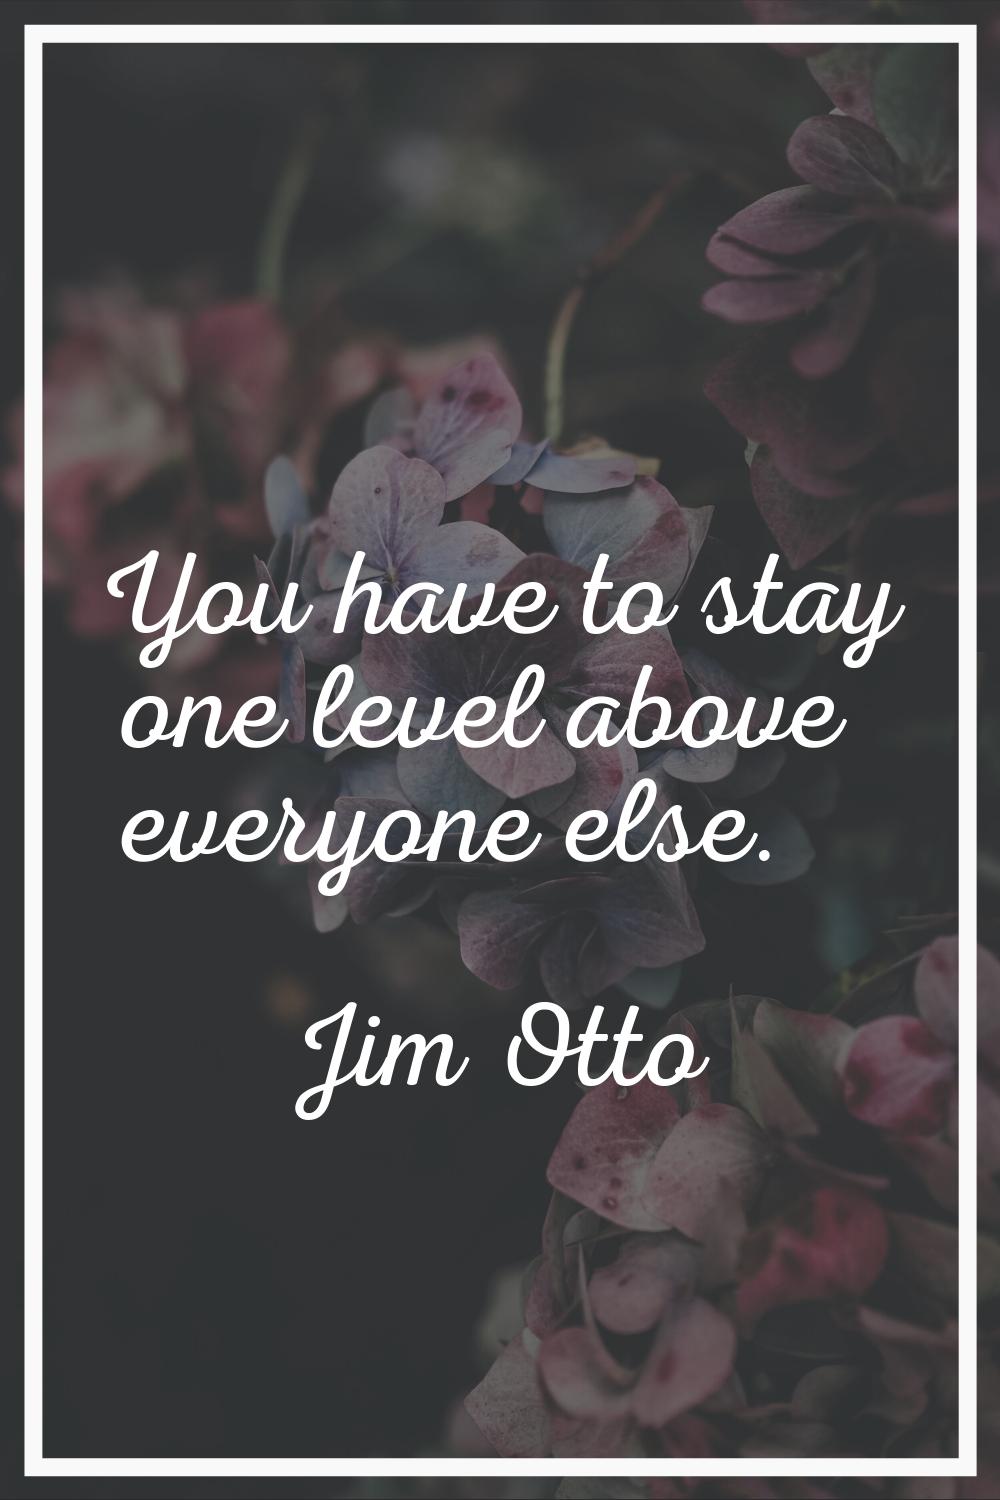 You have to stay one level above everyone else.